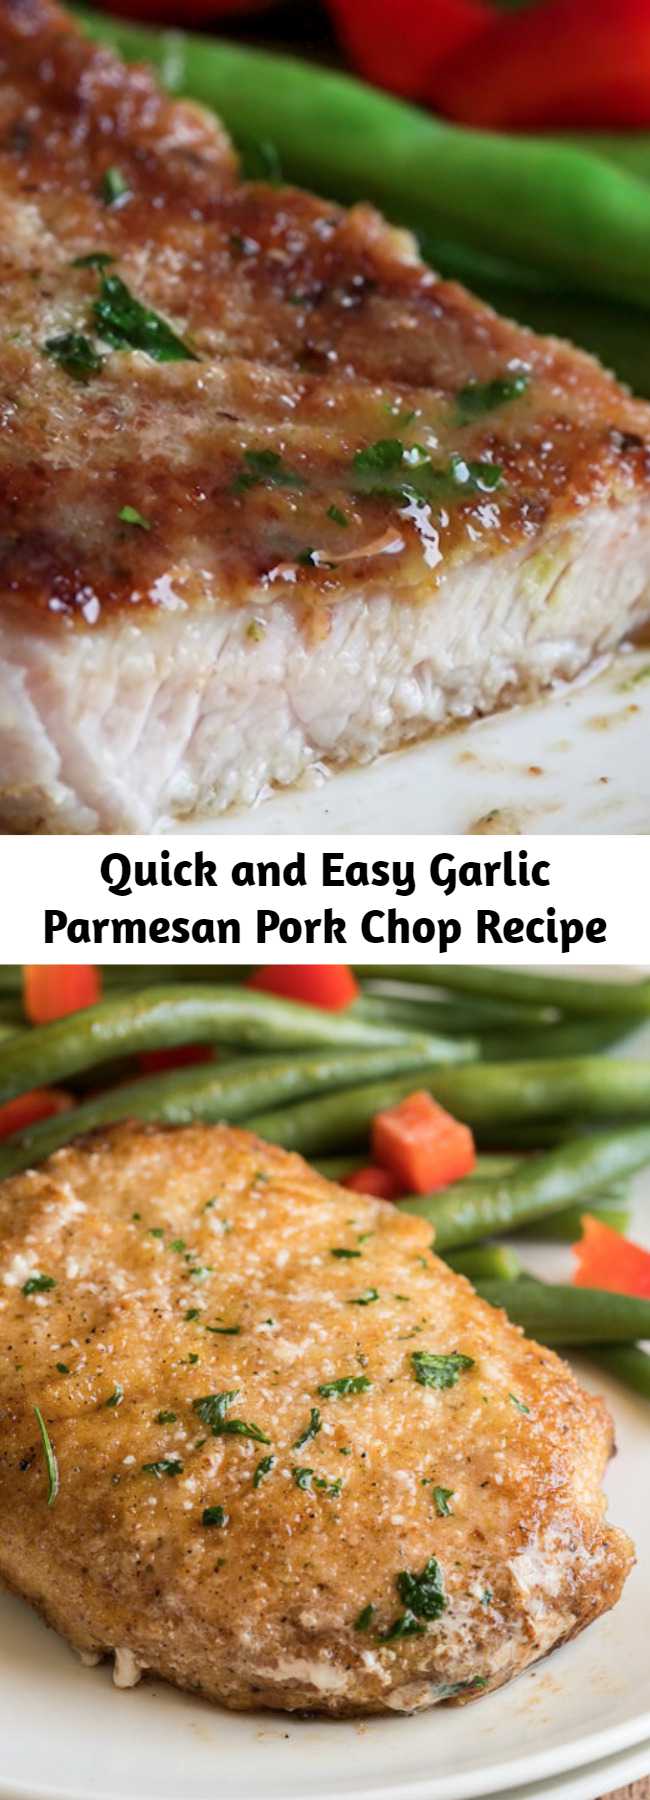 Quick and Easy Garlic Parmesan Pork Chop Recipe - This Garlic Parmesan Pork Chop Recipe is super quick and easy to make with a crispy Parmesan crust on the outside.